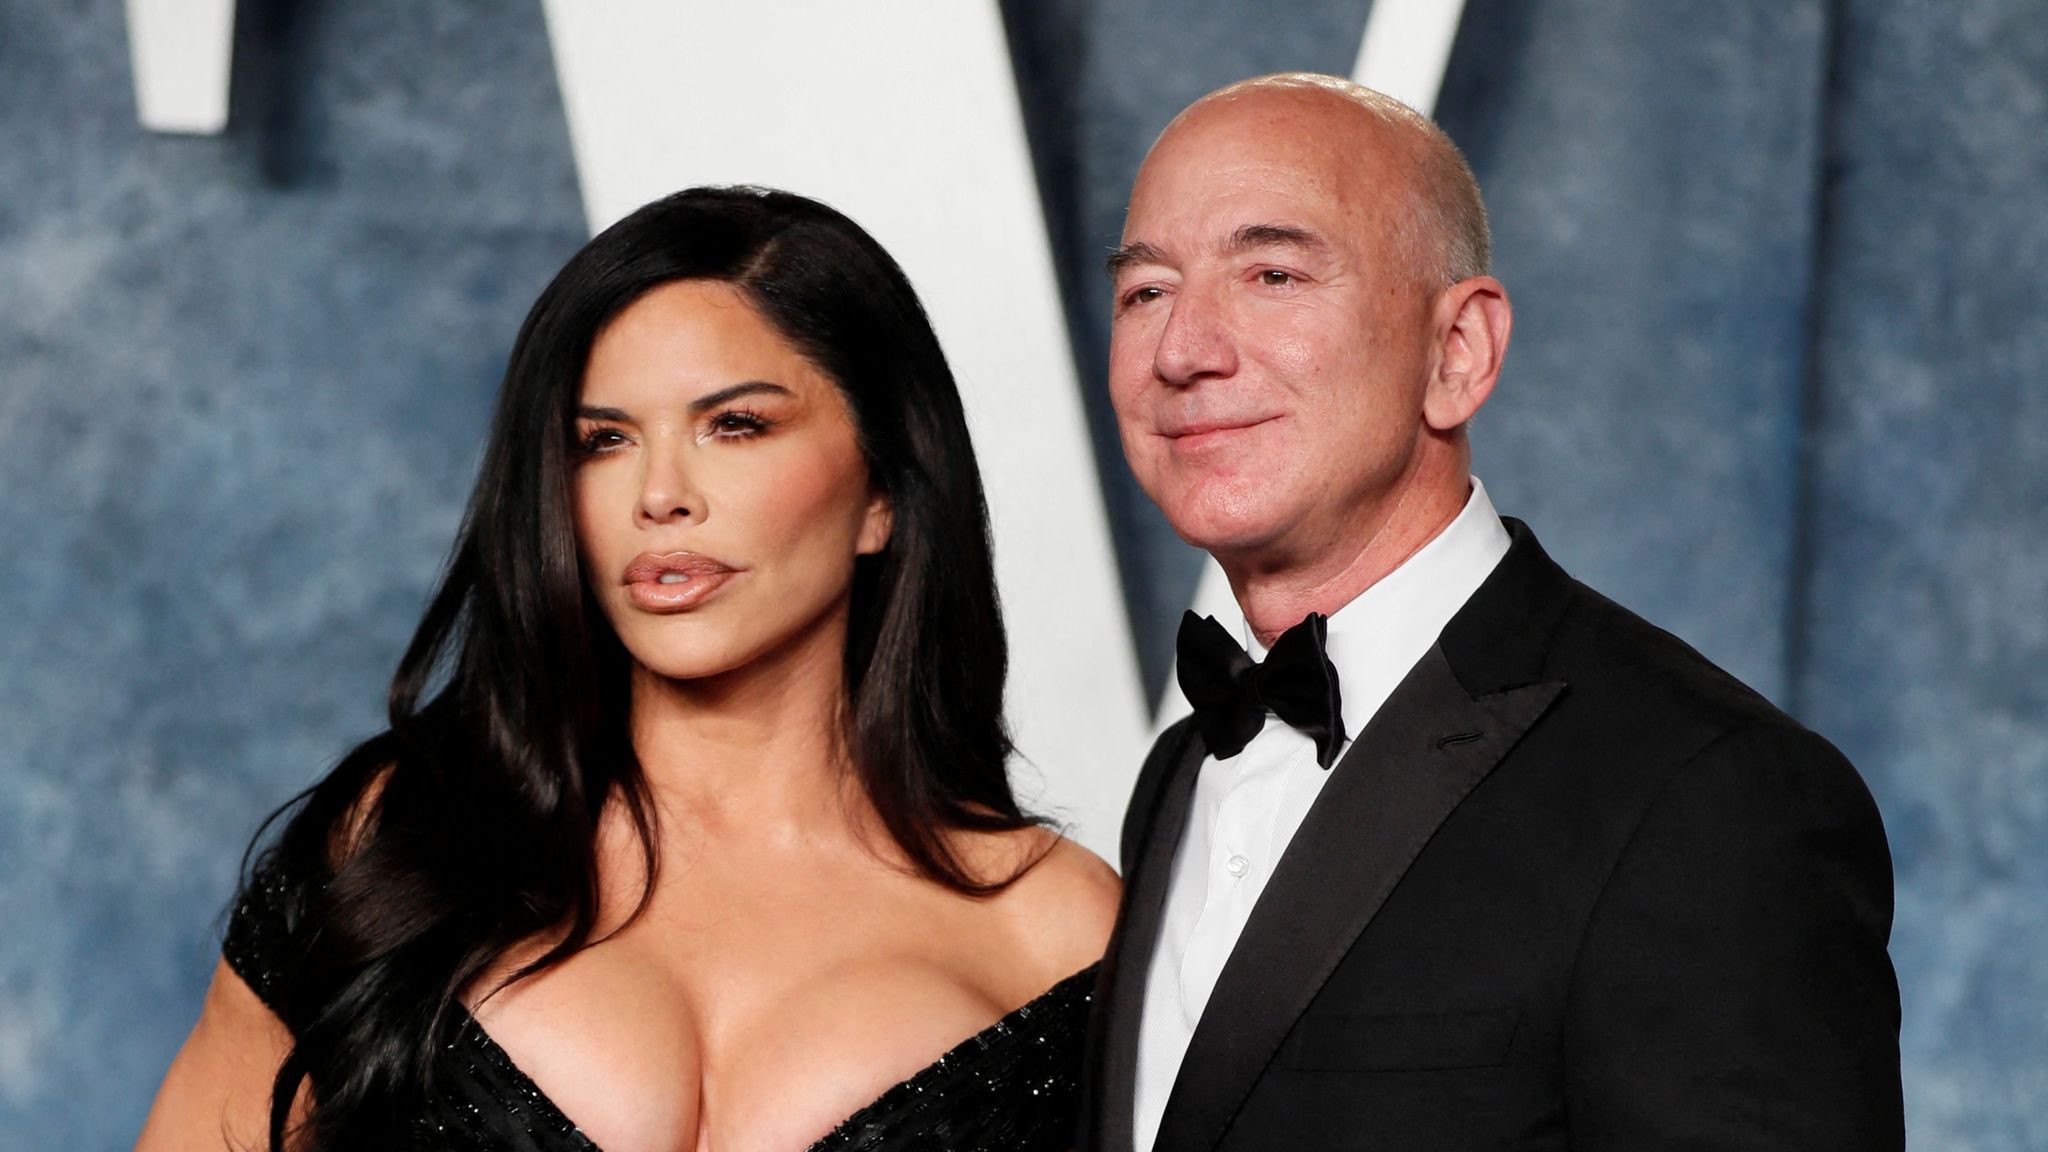 Jeff Bezos and his partner Lauren Sánchez are engaged.